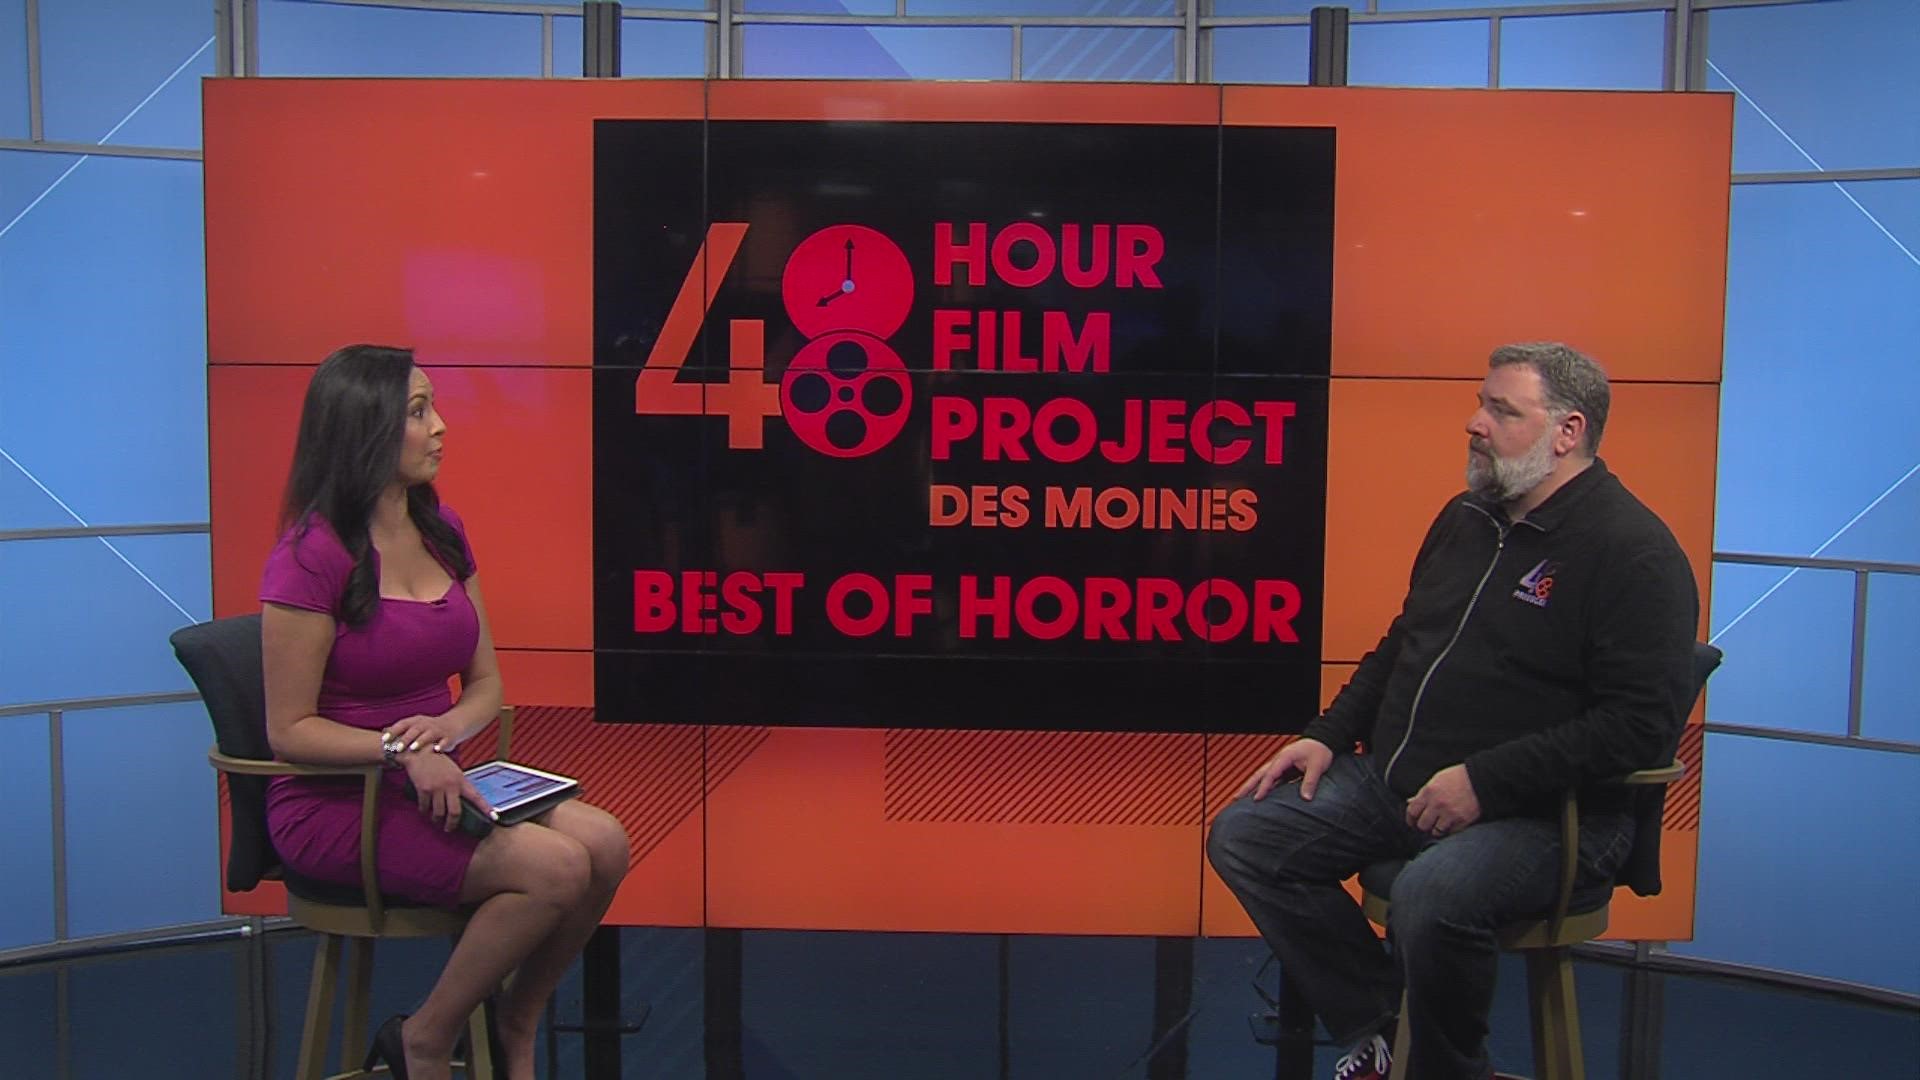 48 Hour Film Project brings the best of horror movies to Des Moines